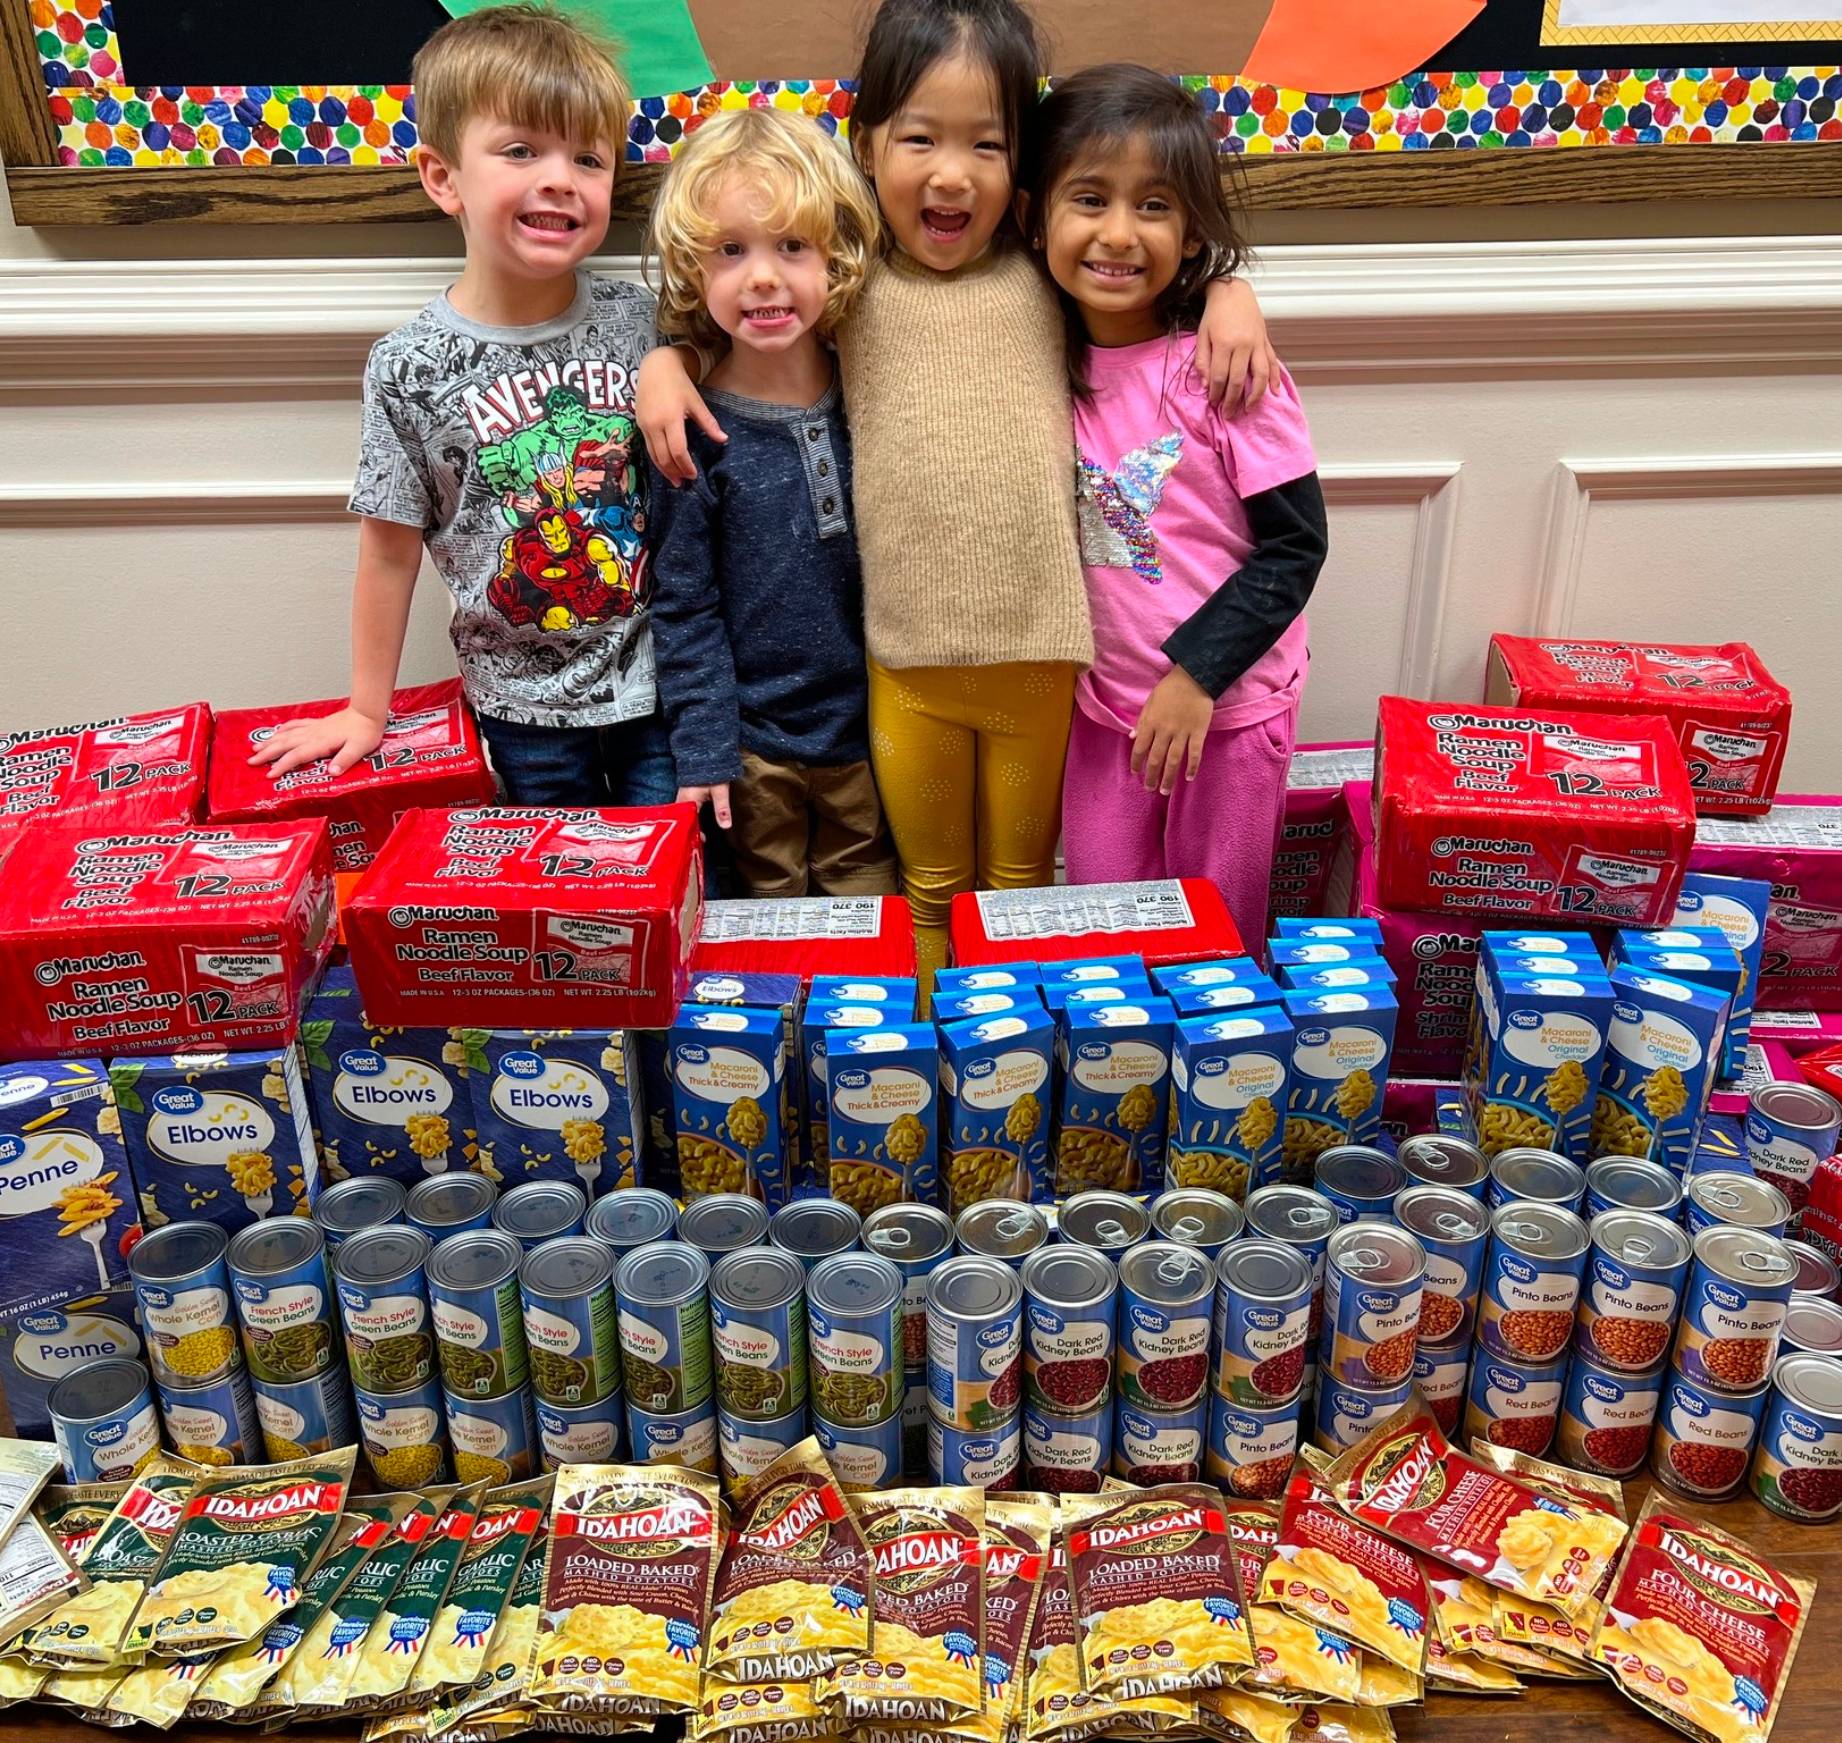 Students from Primrose School at Johns Creek (Suwanee, GA) sort items for the school’s annual Caring and Giving Food Drive.